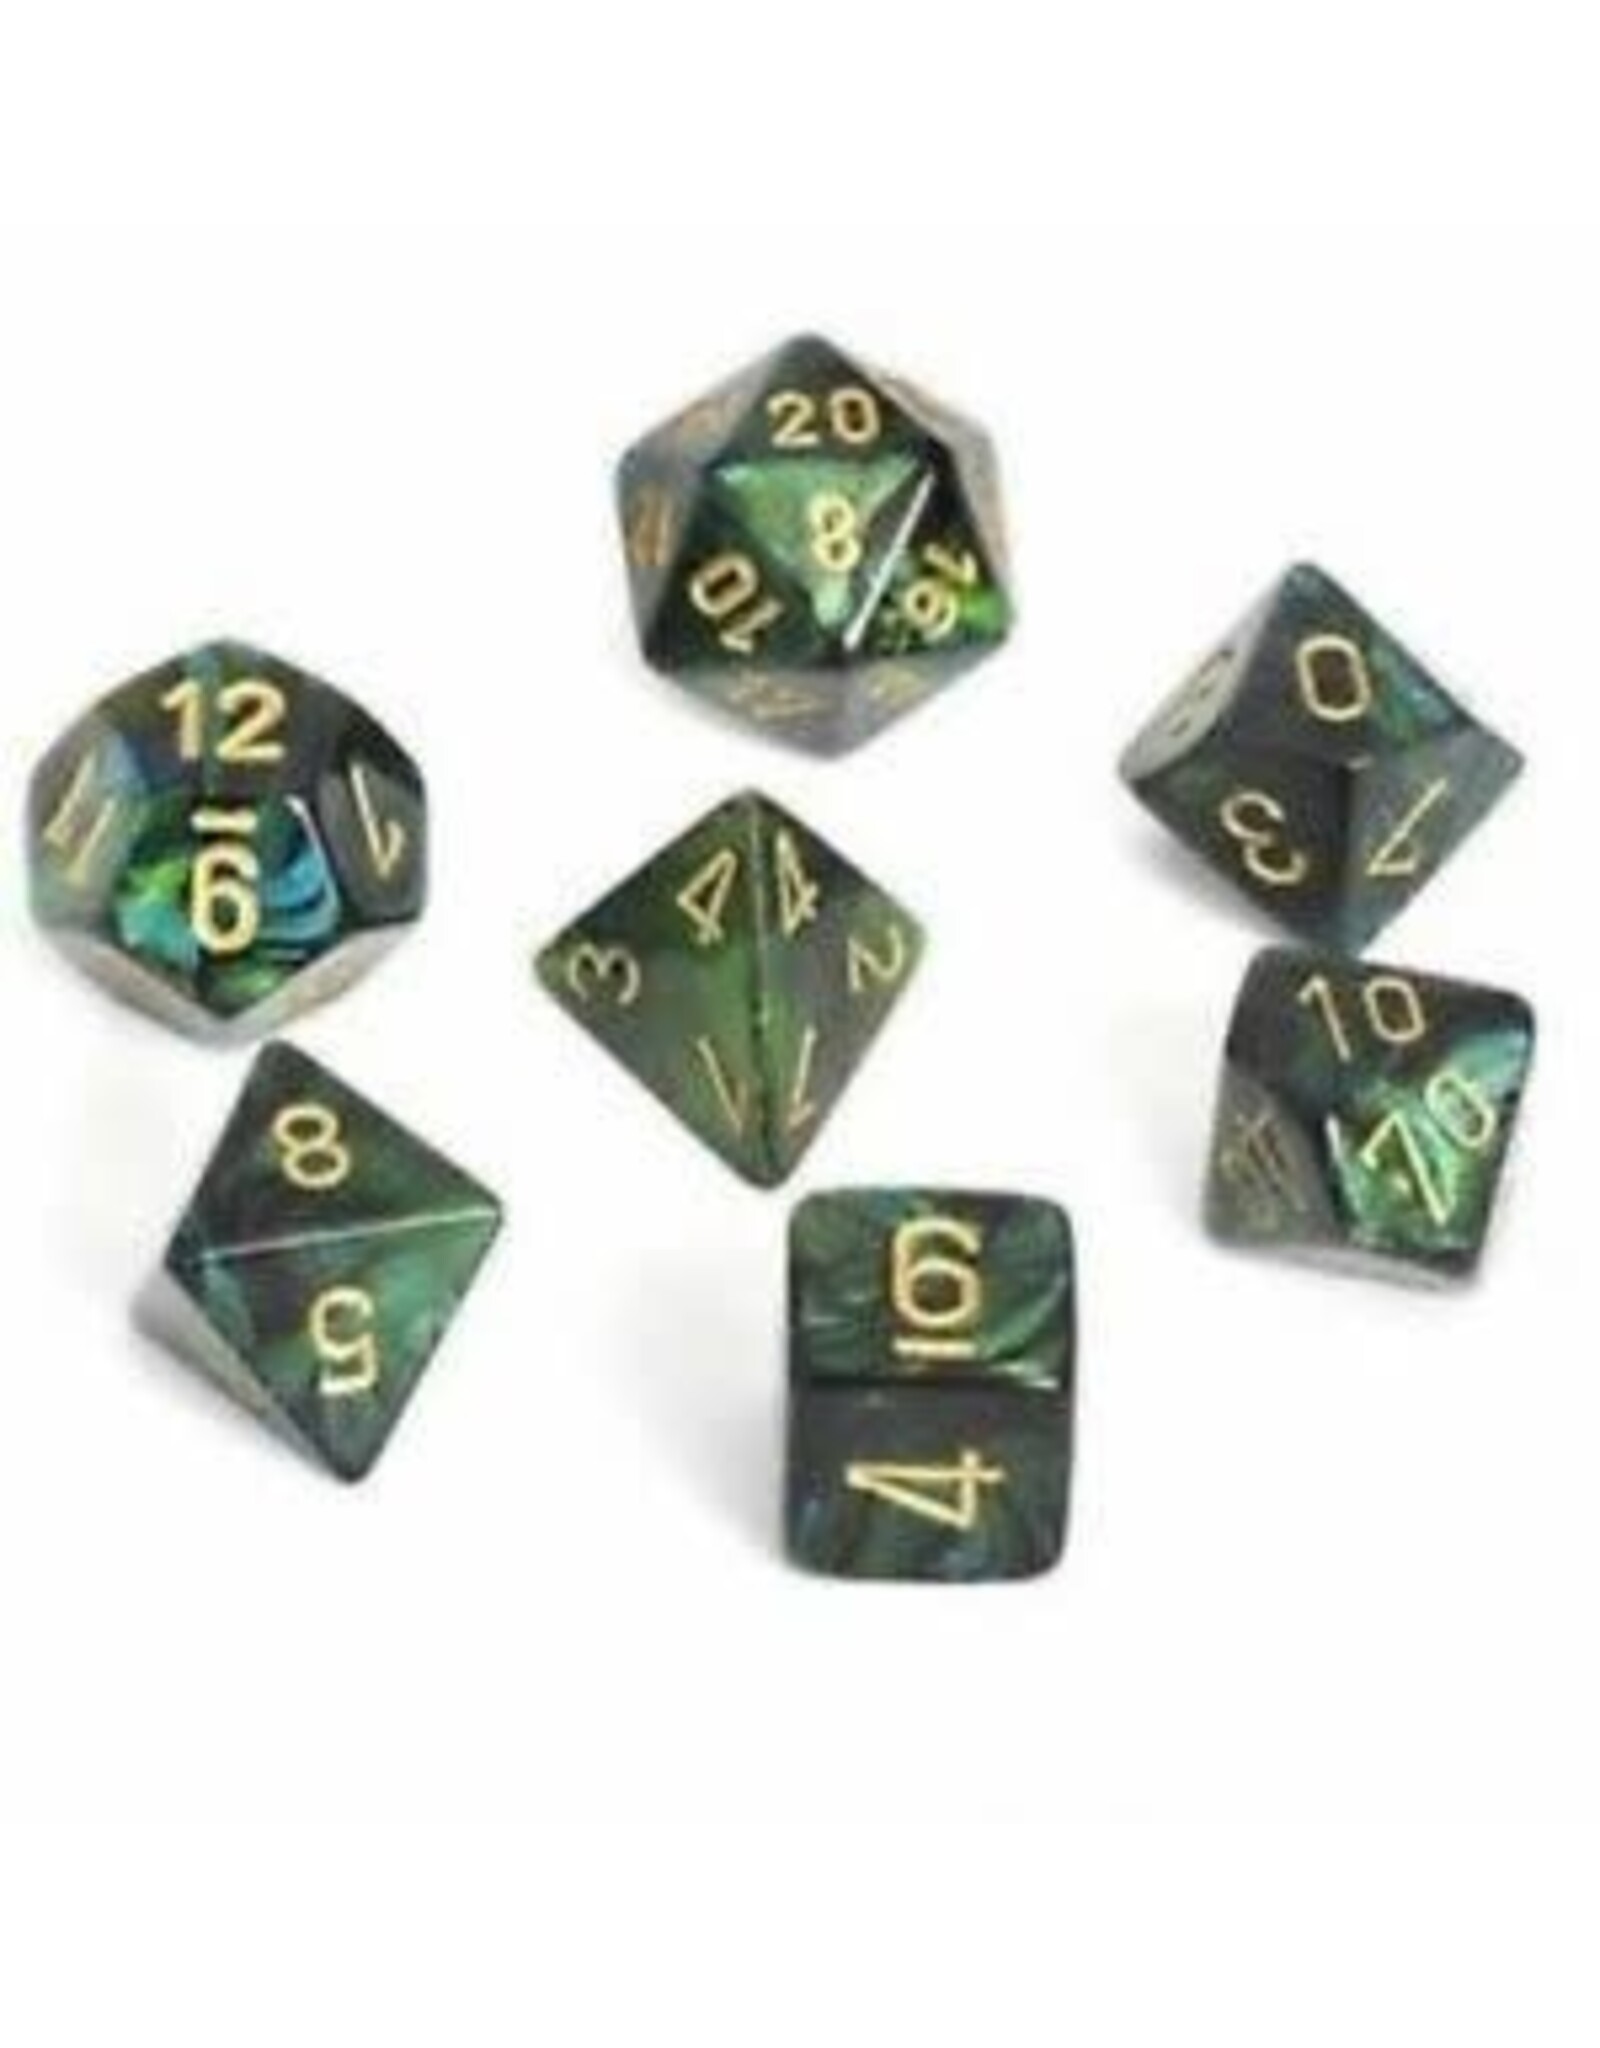 Chessex Jade w/gold Scarab poly 7 dice set